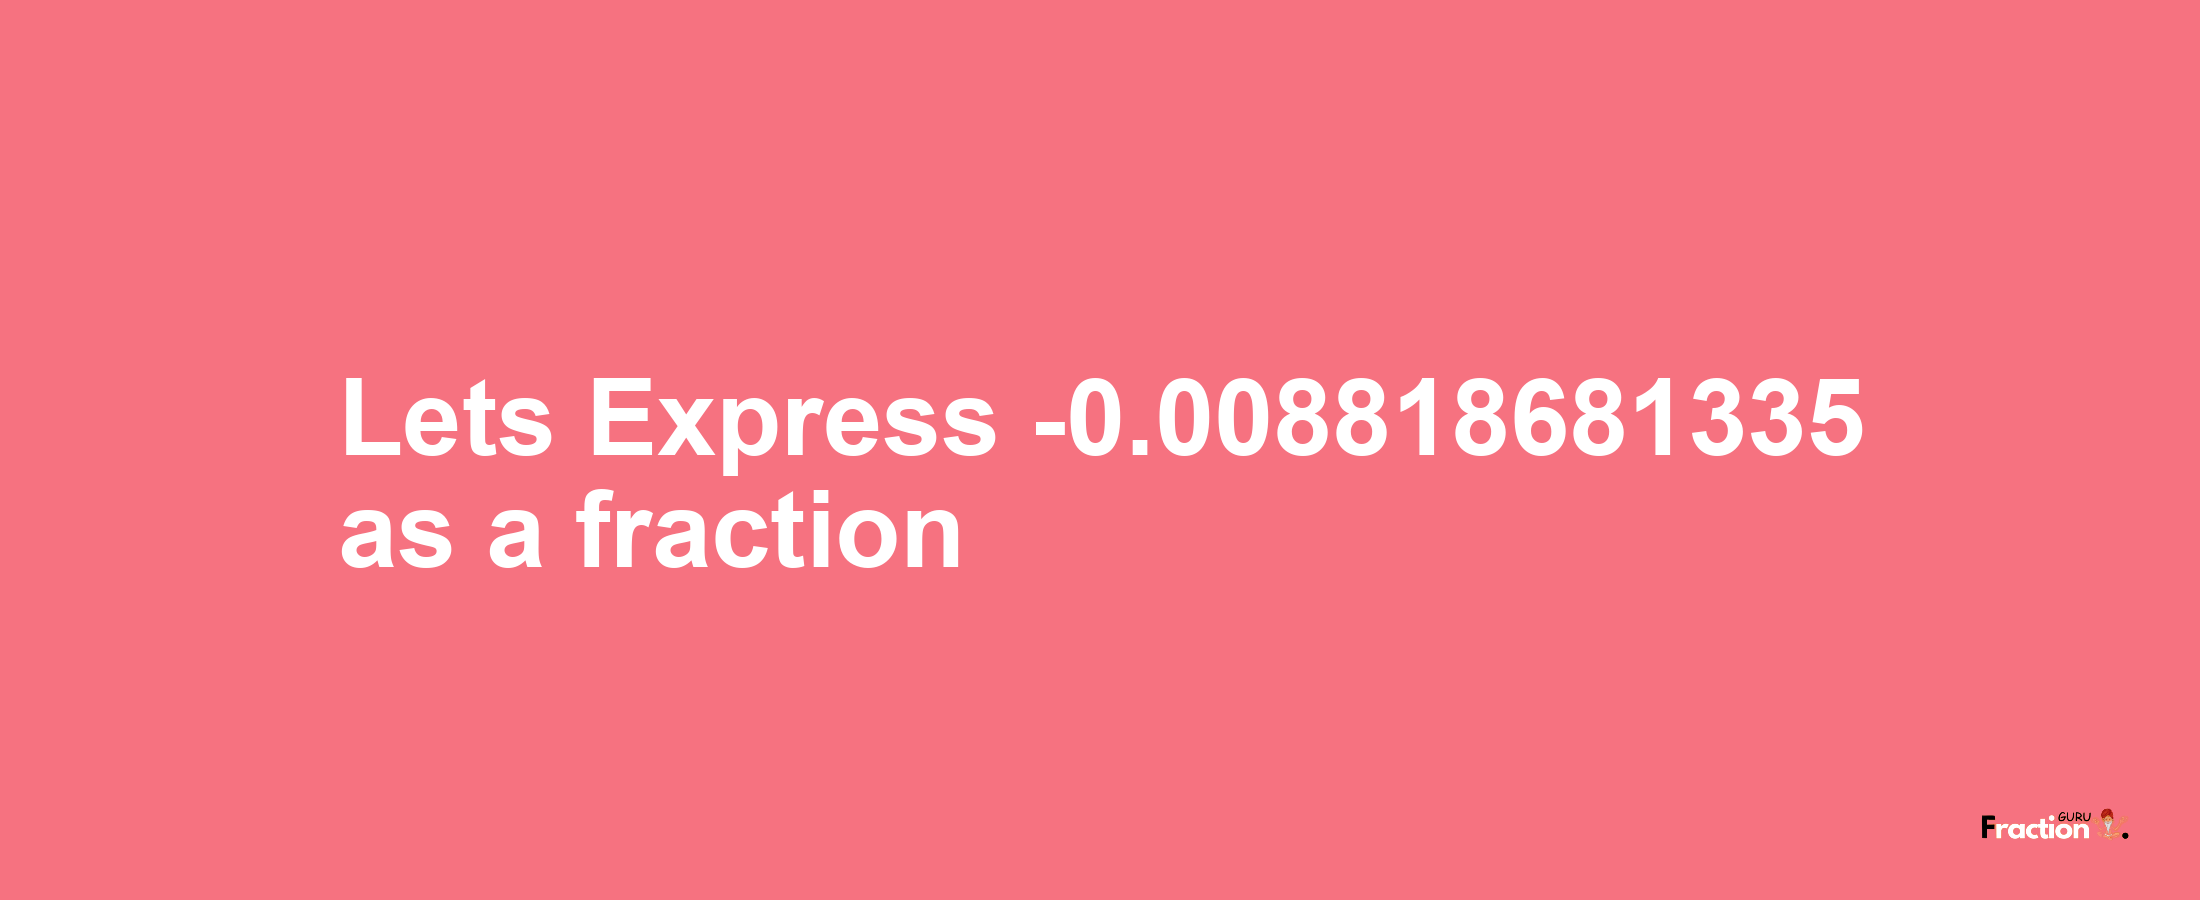 Lets Express -0.008818681335 as afraction